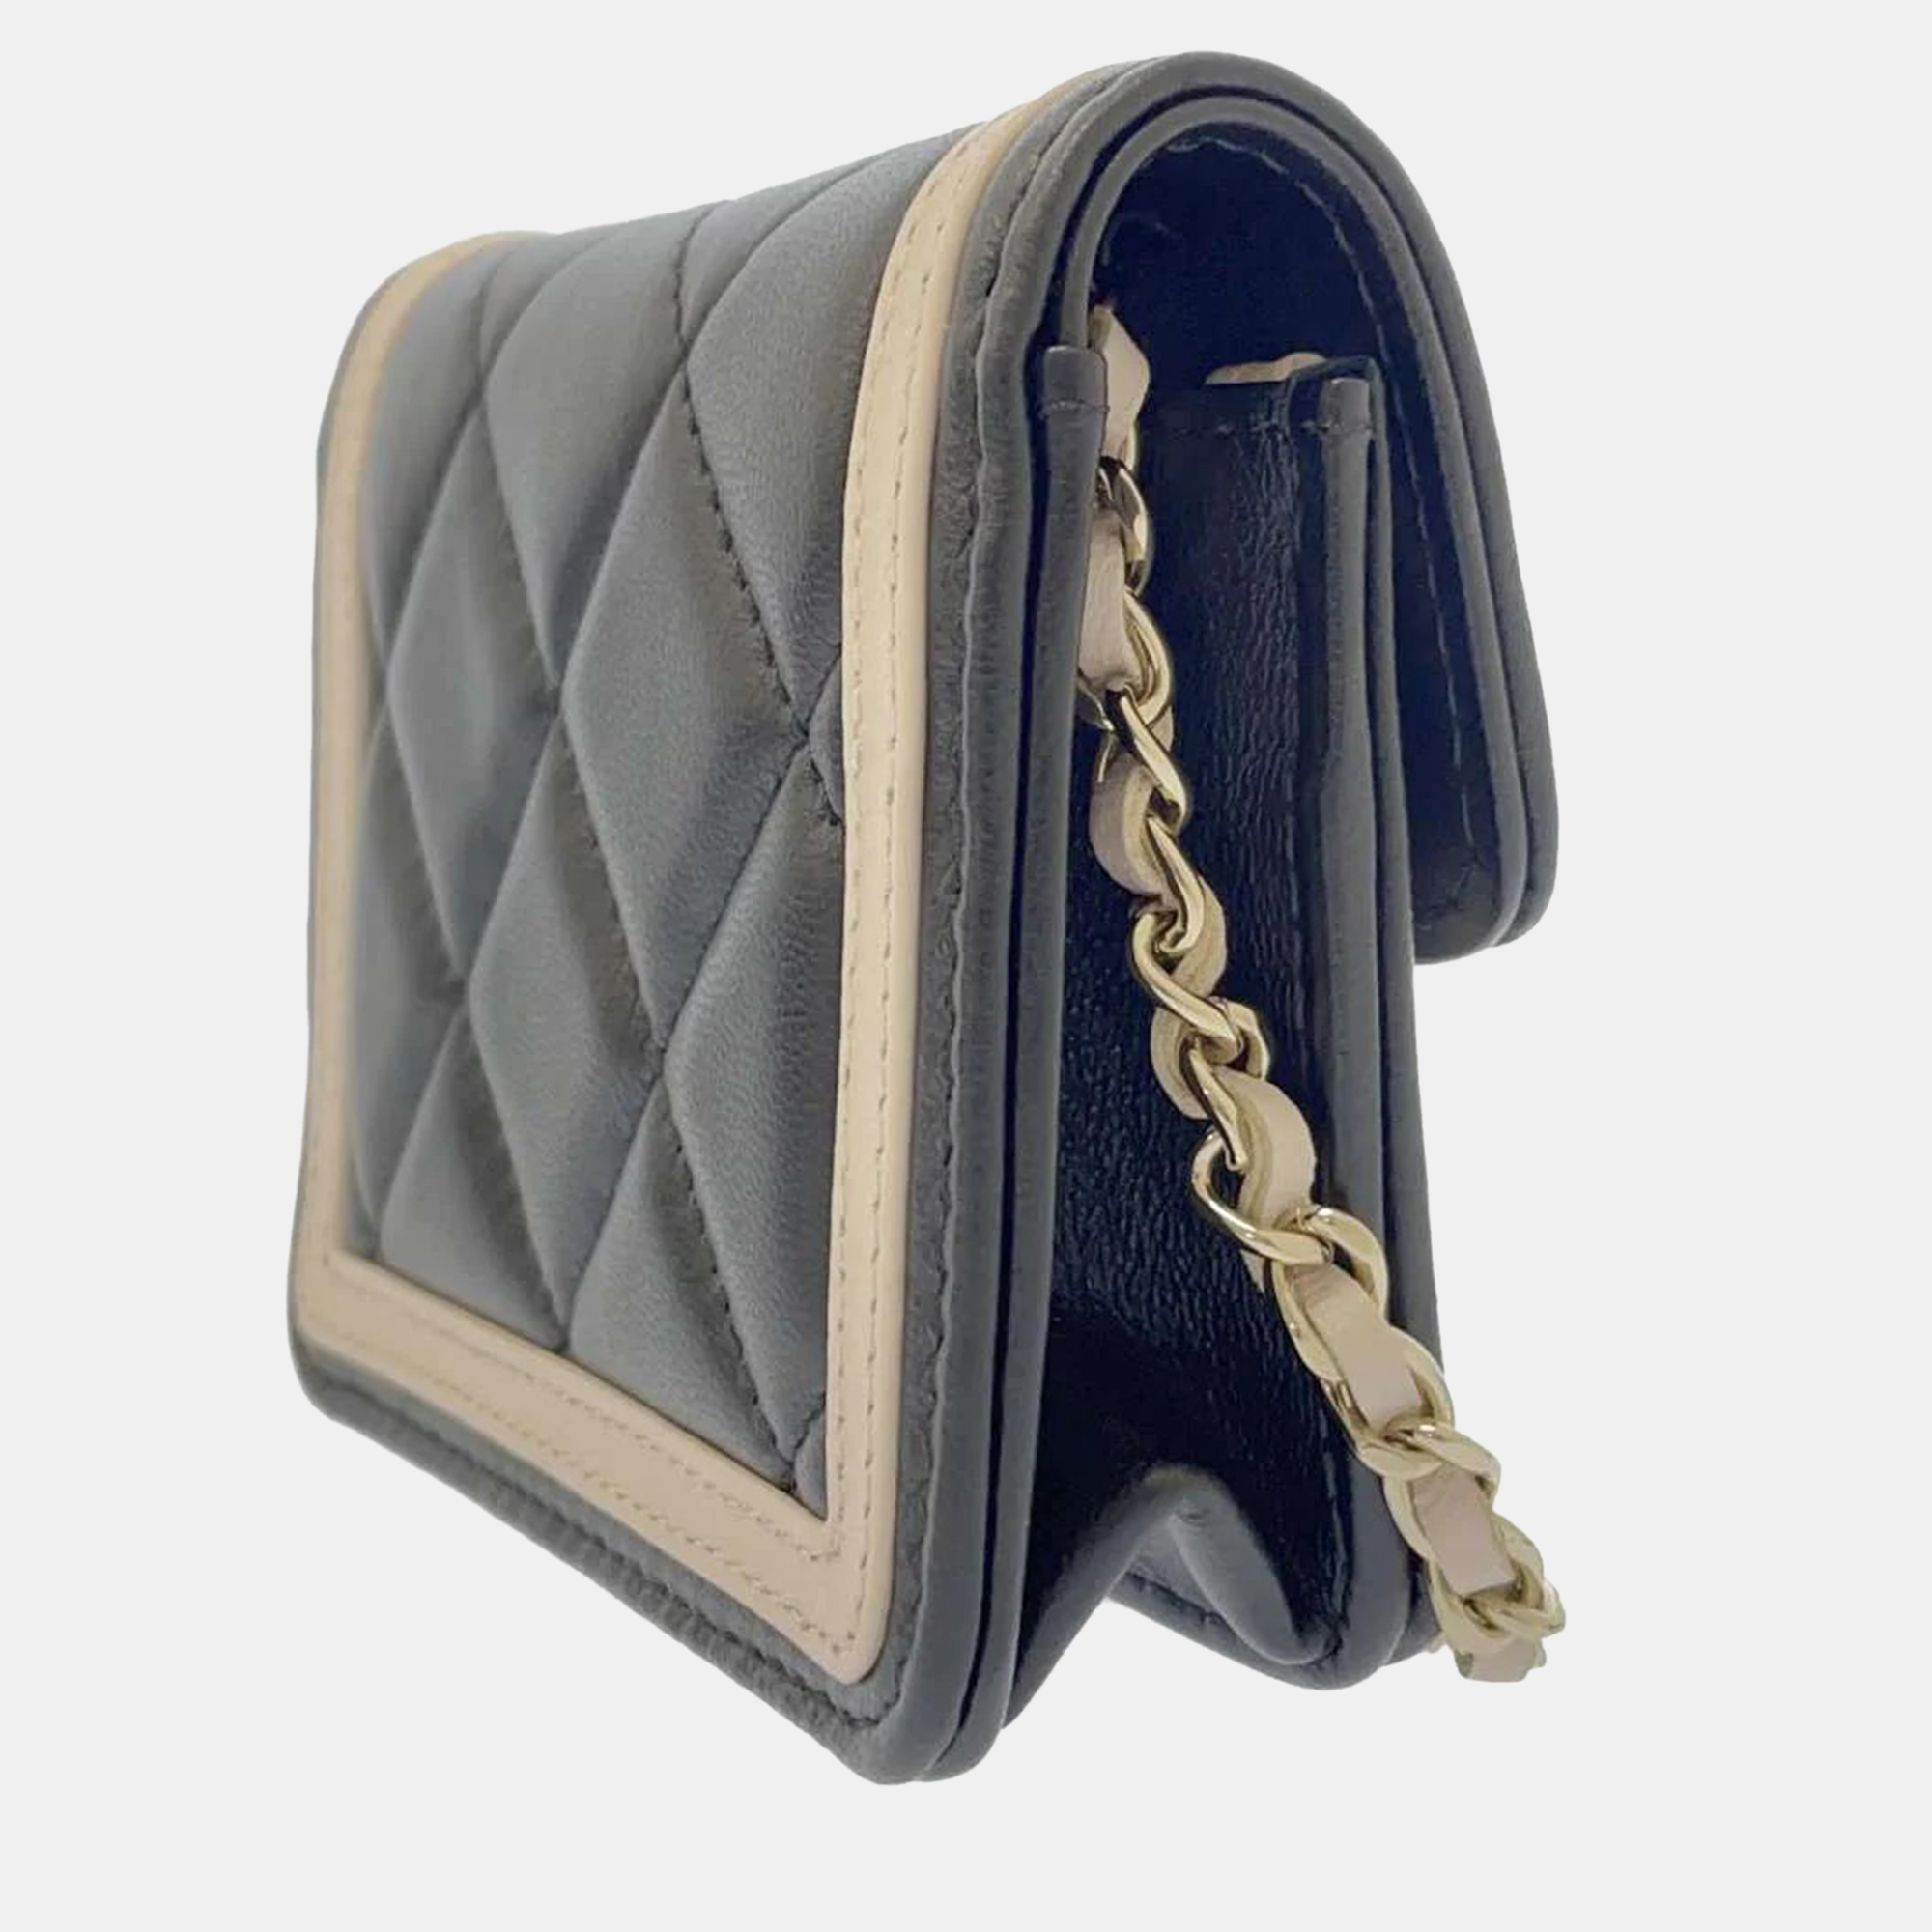 CHANEL Black/Beige Quilted Lambskin Leather Clutch With Chain